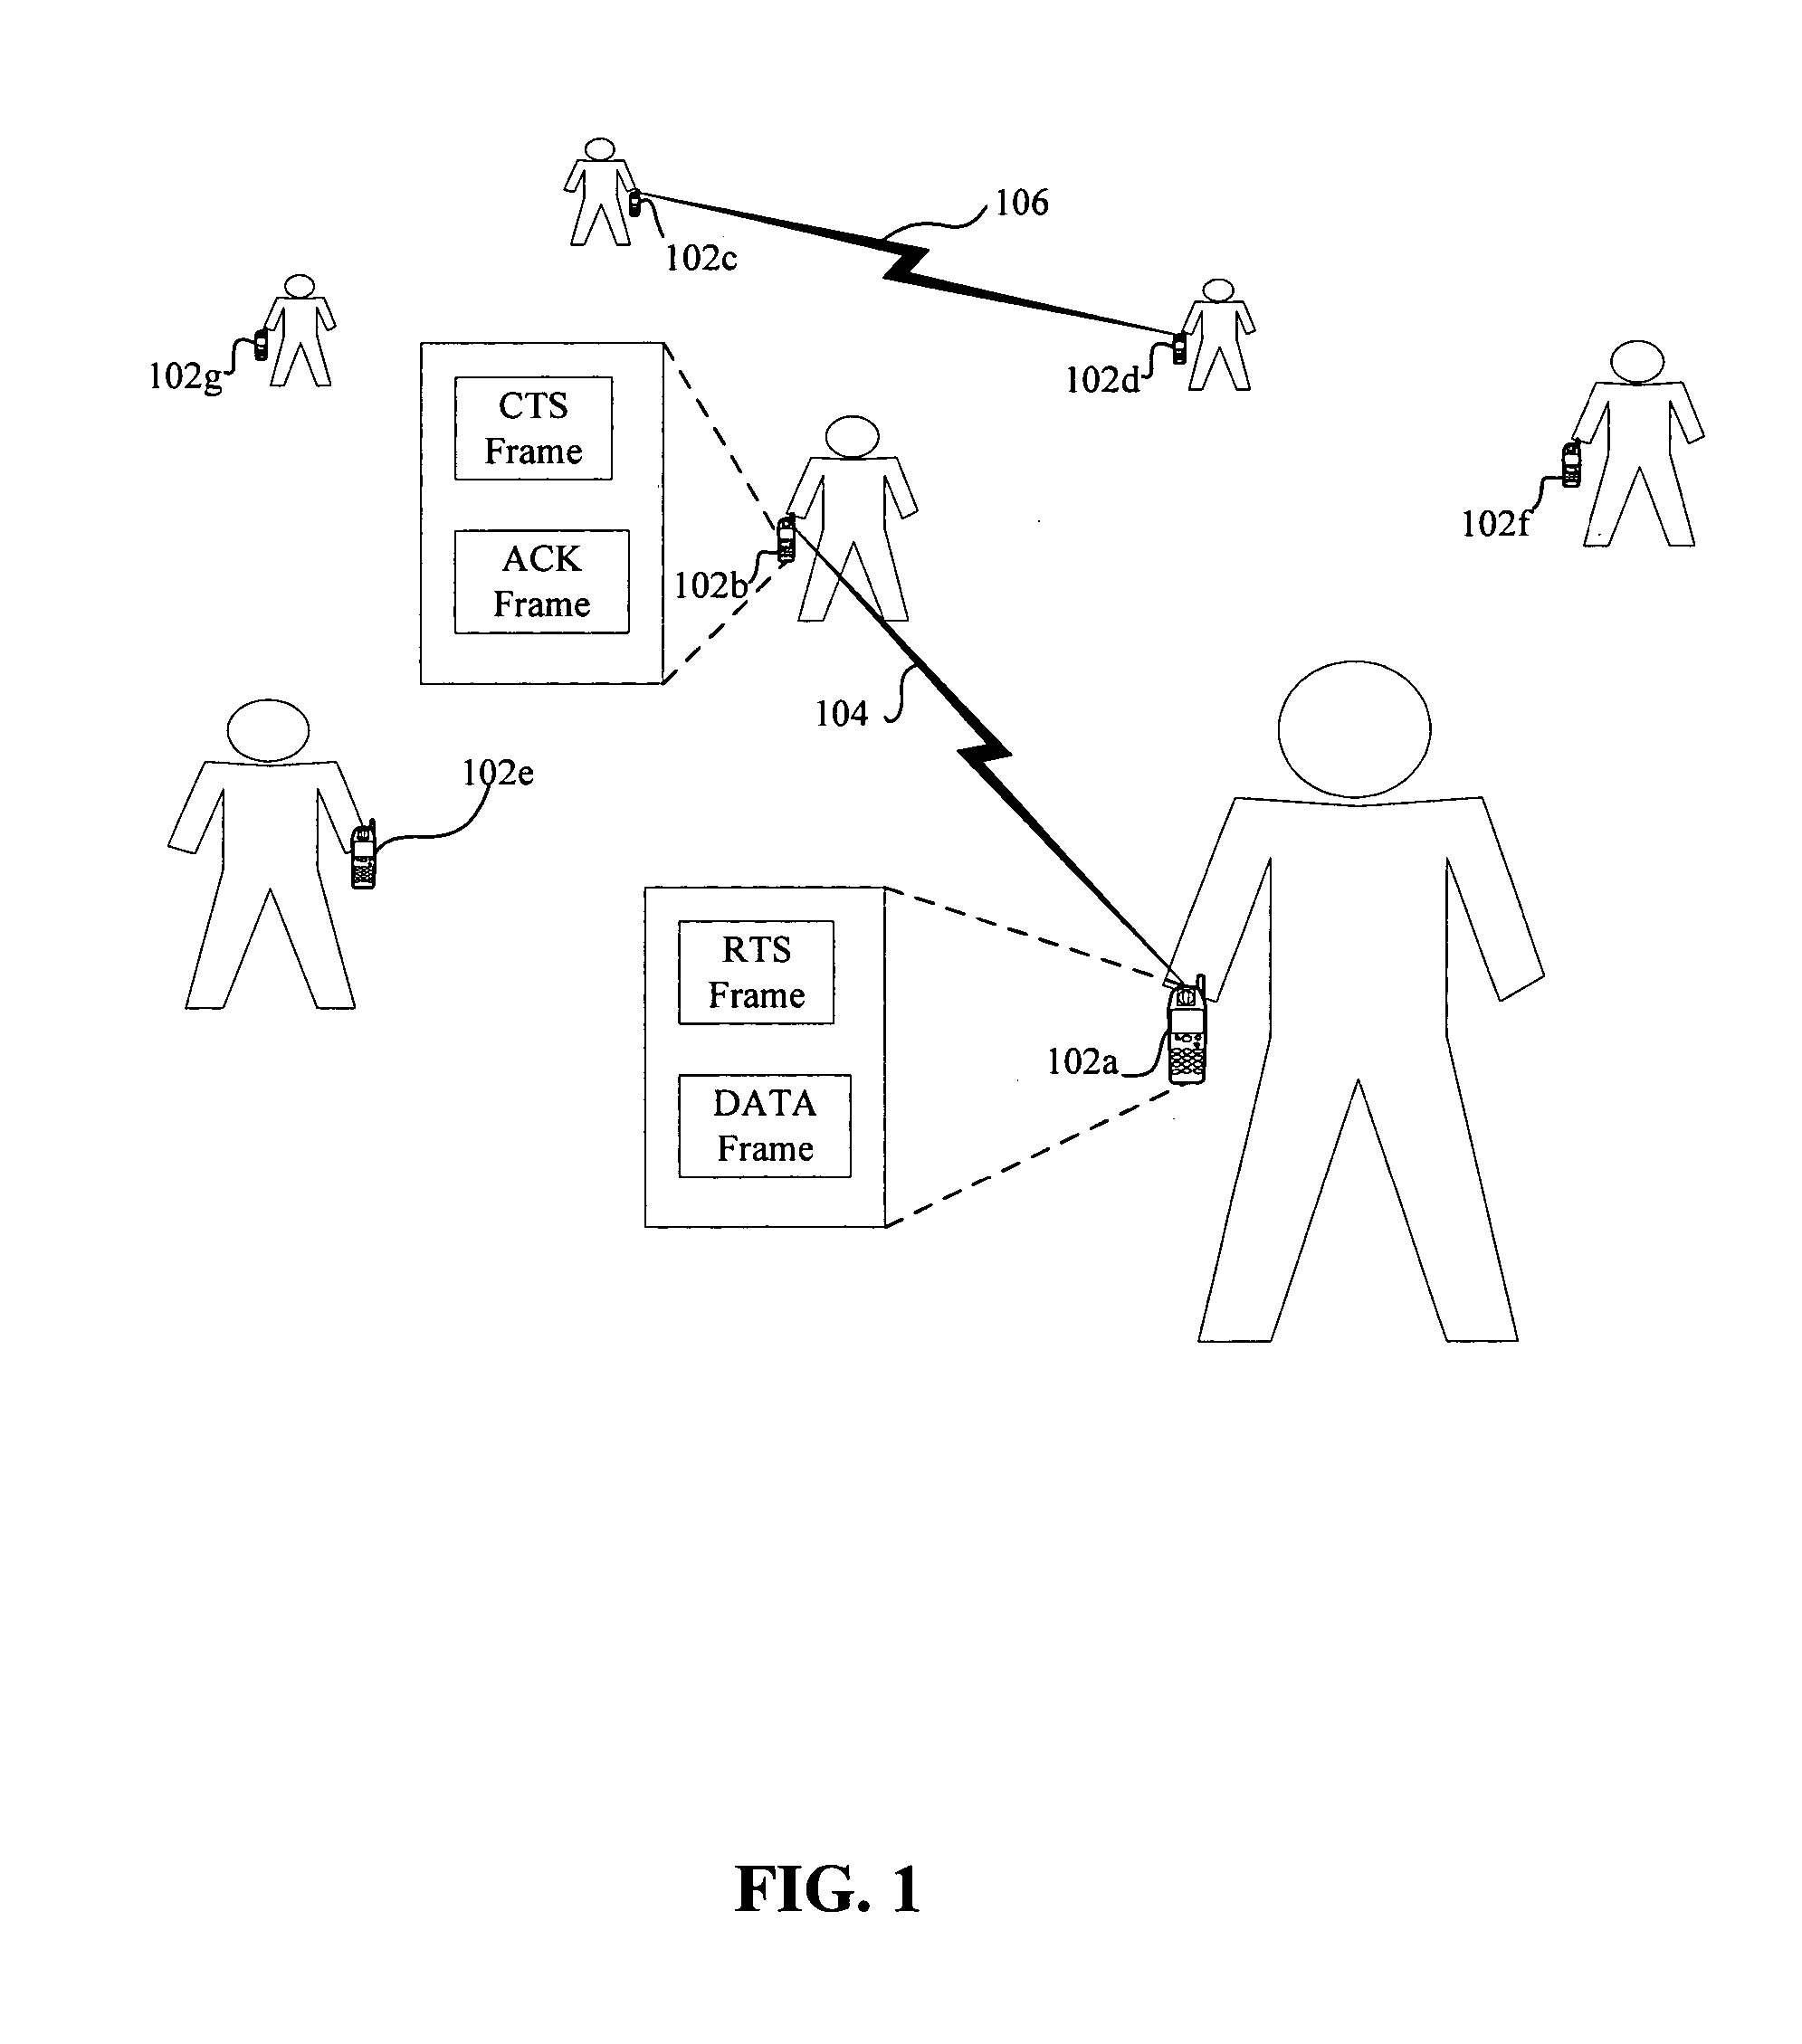 Coordinated directional medium access control in a wireless network